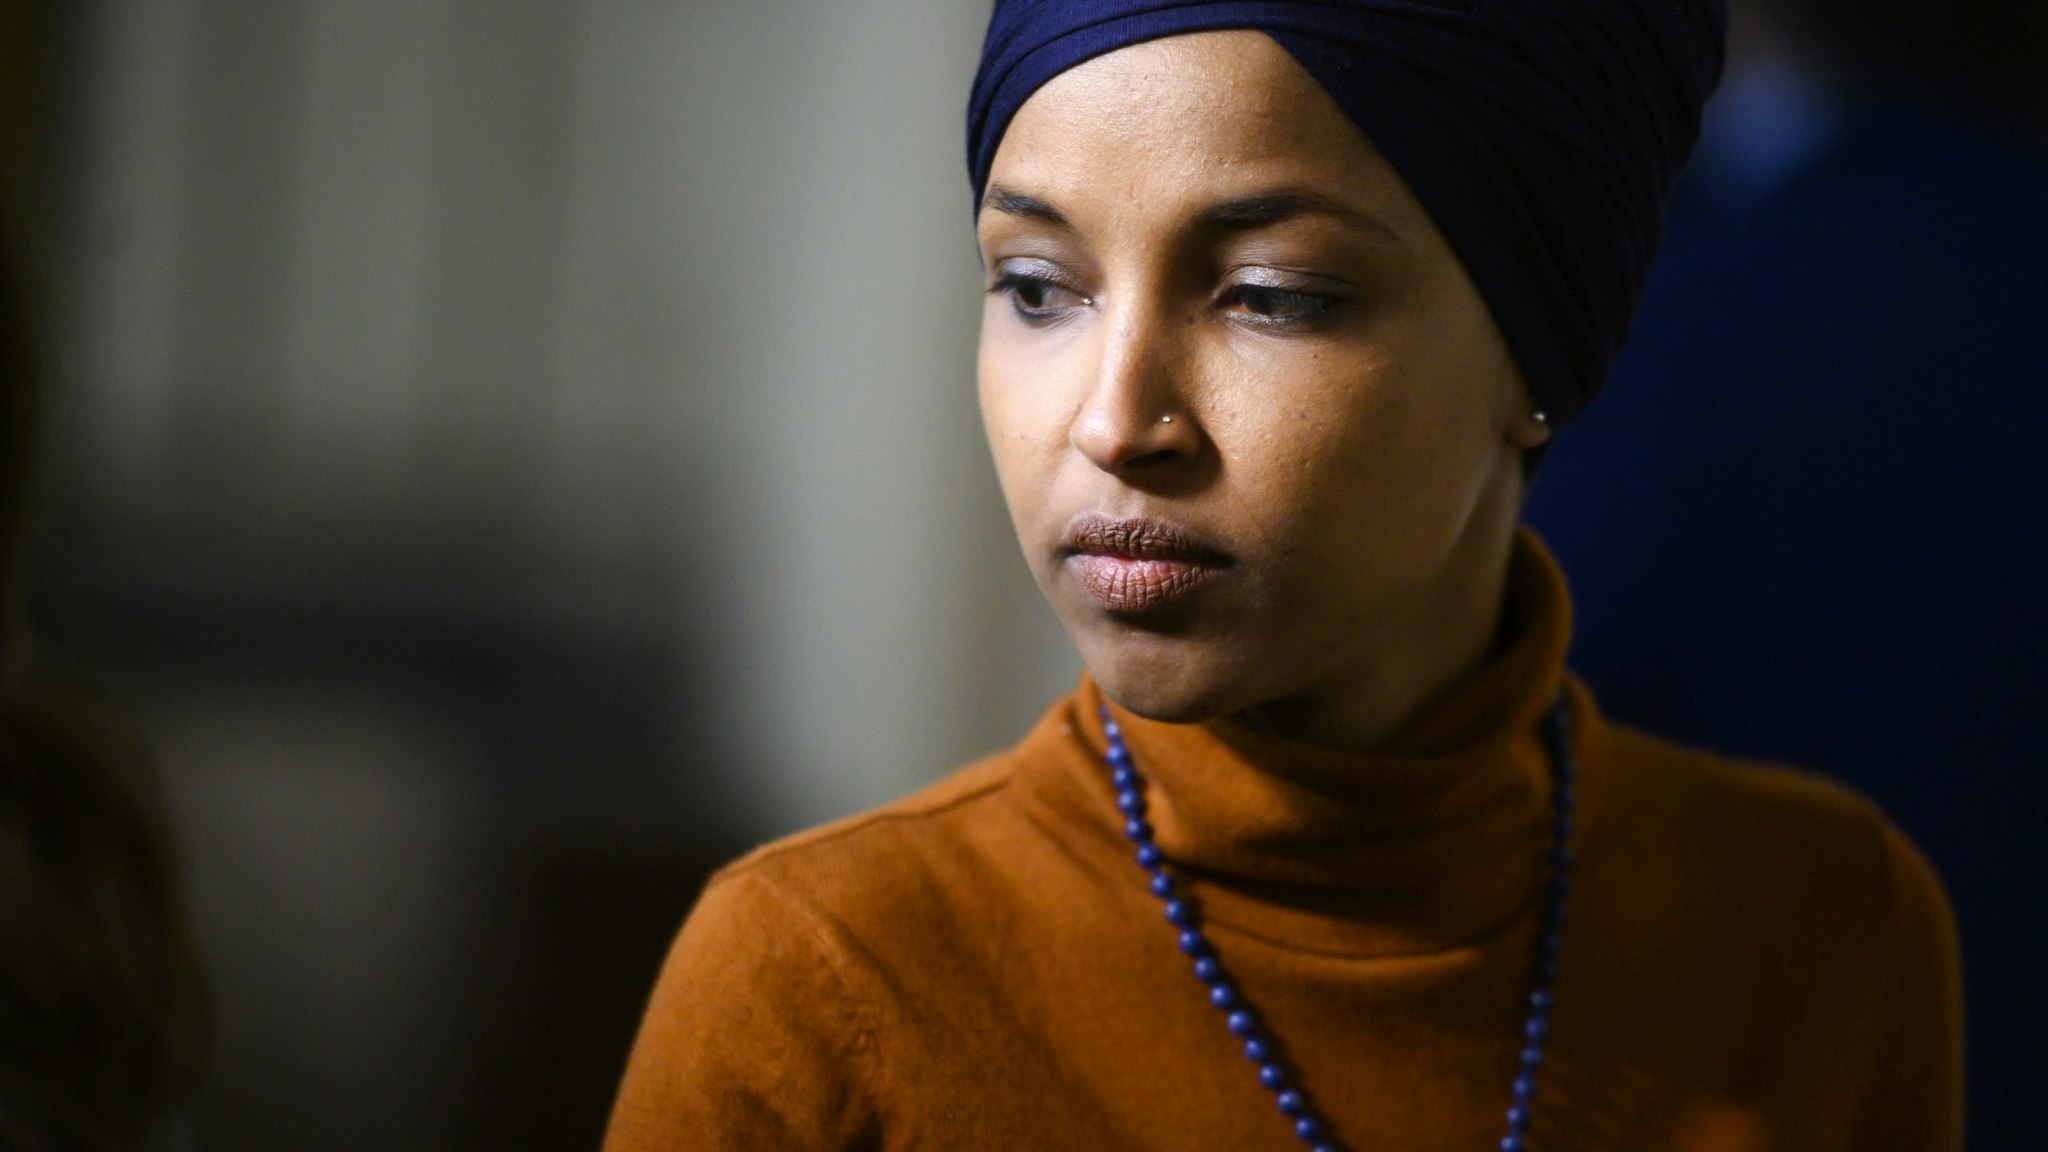 UNITED STATES - FEBRUARY 11: Rep. Ilhan Omar, D-Minn., leaves a meeting of the House Democratic Caucus in the Capitol on Tuesday, February 11, 2020.